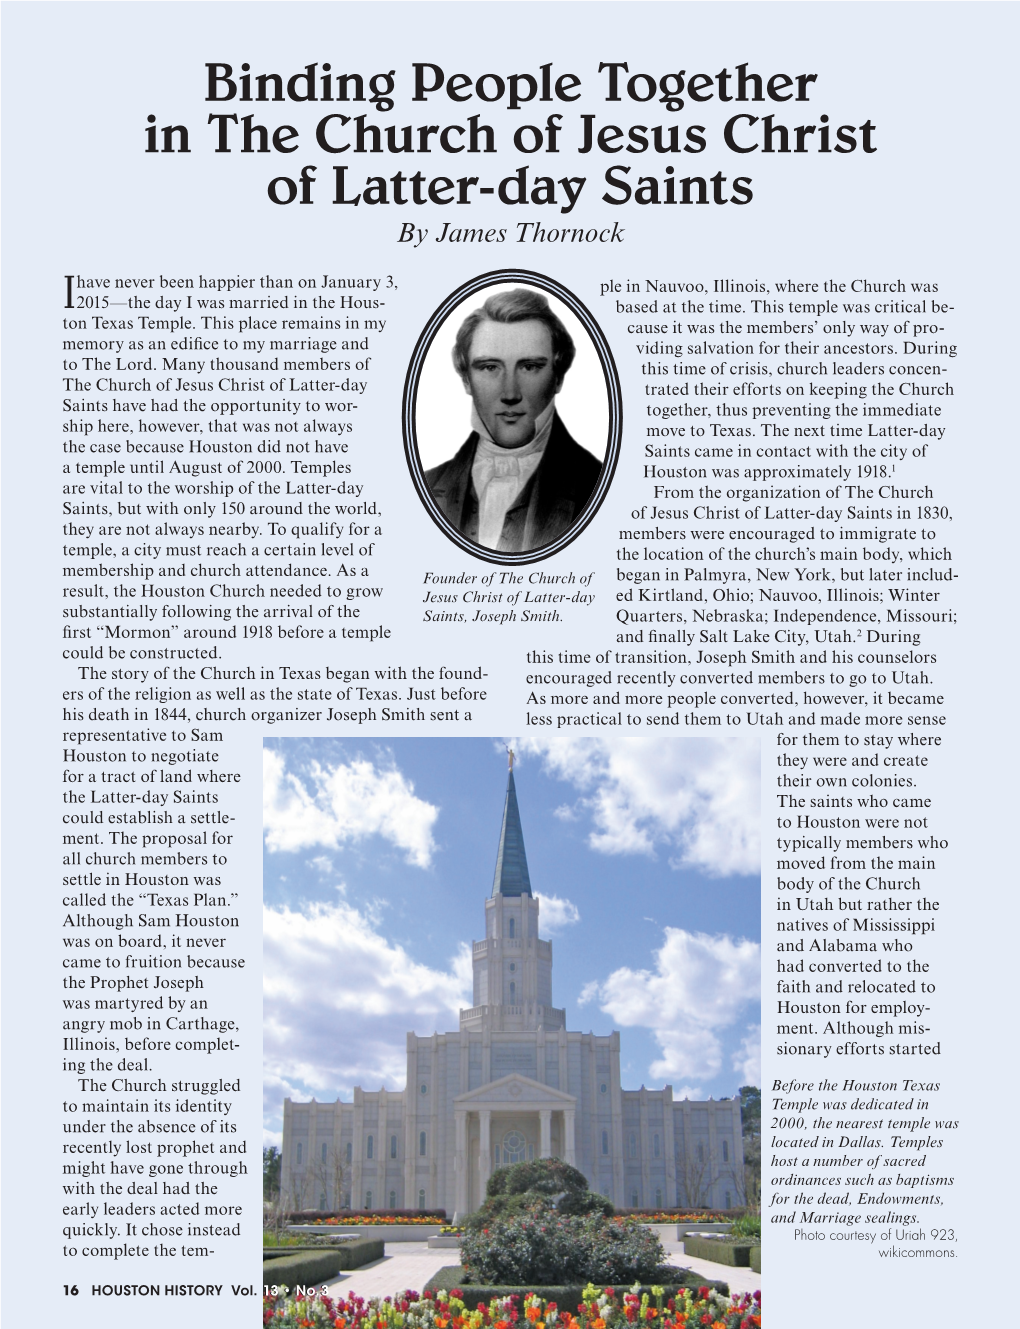 Binding People Together in the Church of Jesus Christ of Latter-Day Saints by James Thornock